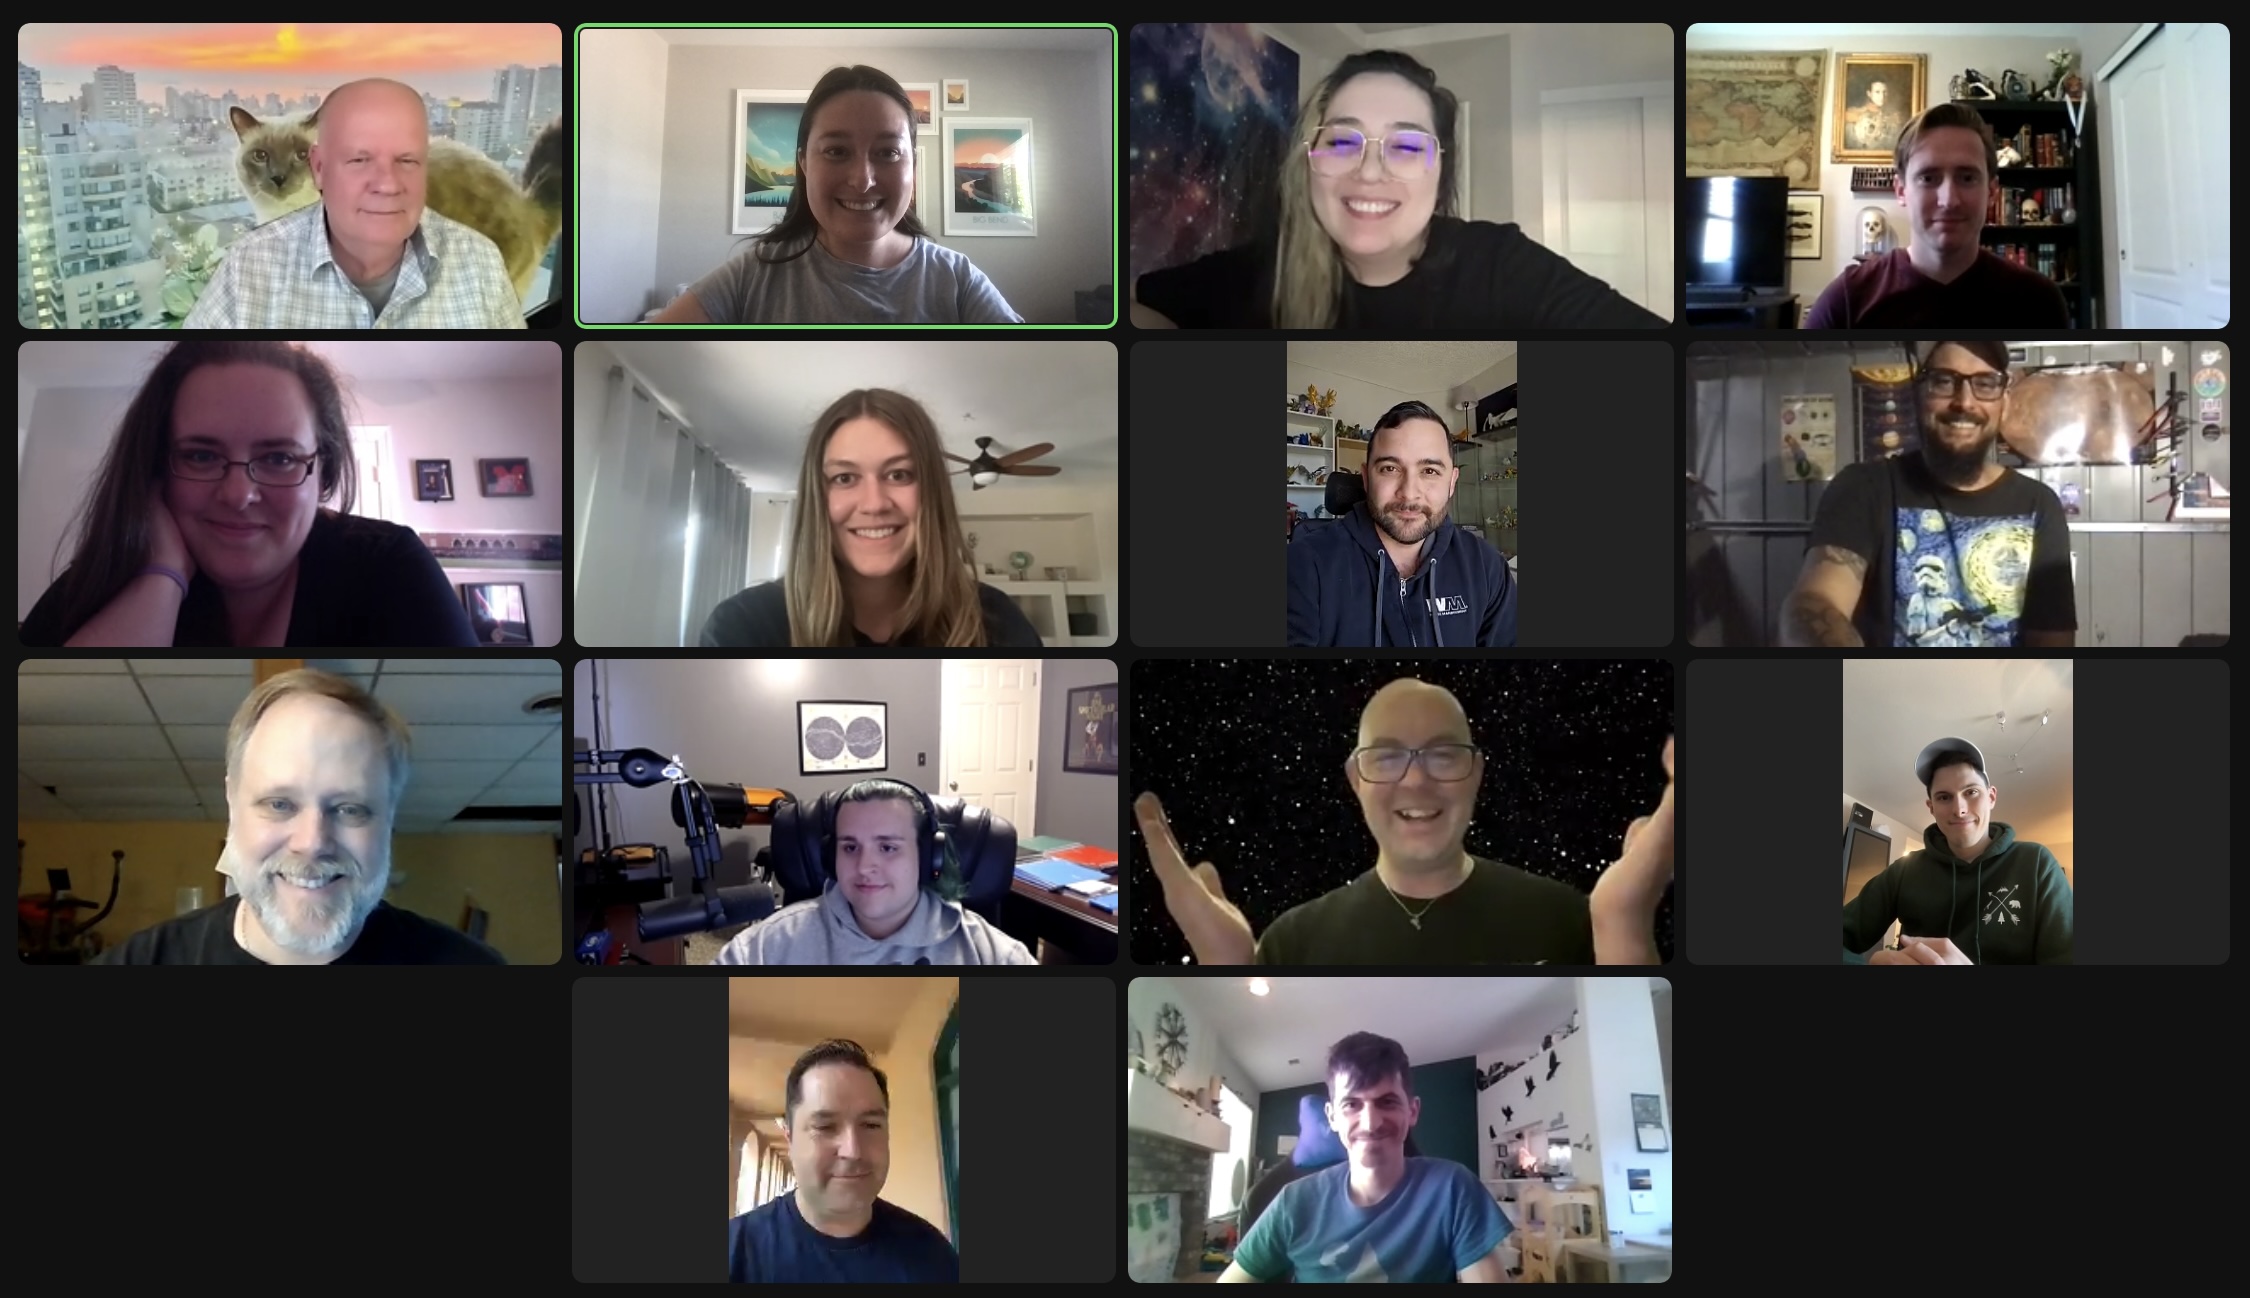 A composite screenshot of 12 participants on a video call.